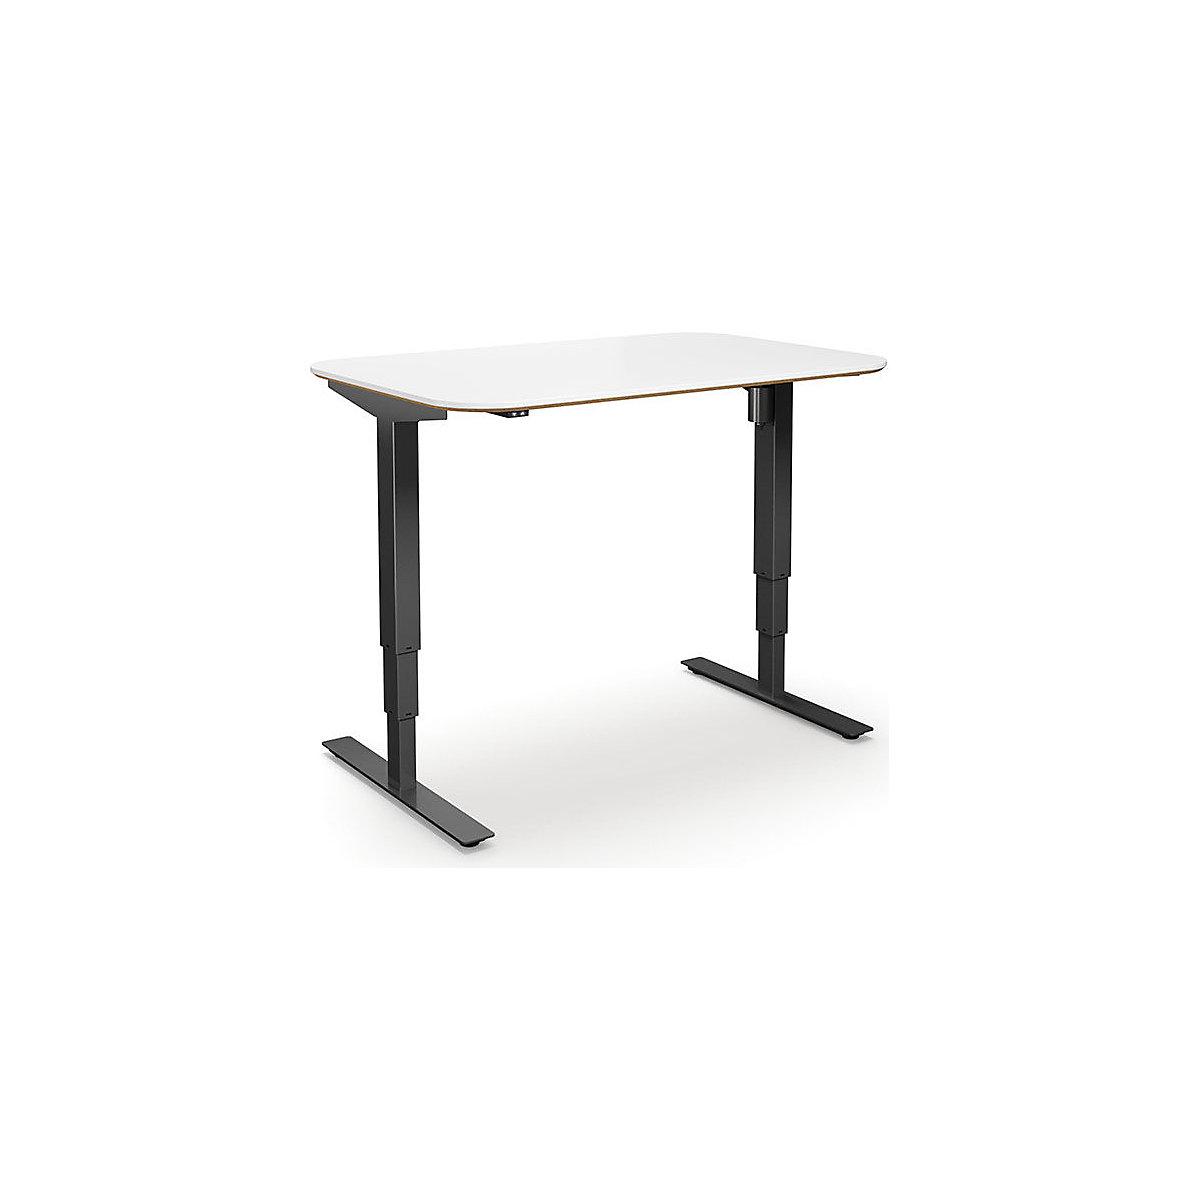 Atlanta Trend desk, electrically height adjustable, straight, rounded corners, WxD 1200 x 800 mm, white/black-17